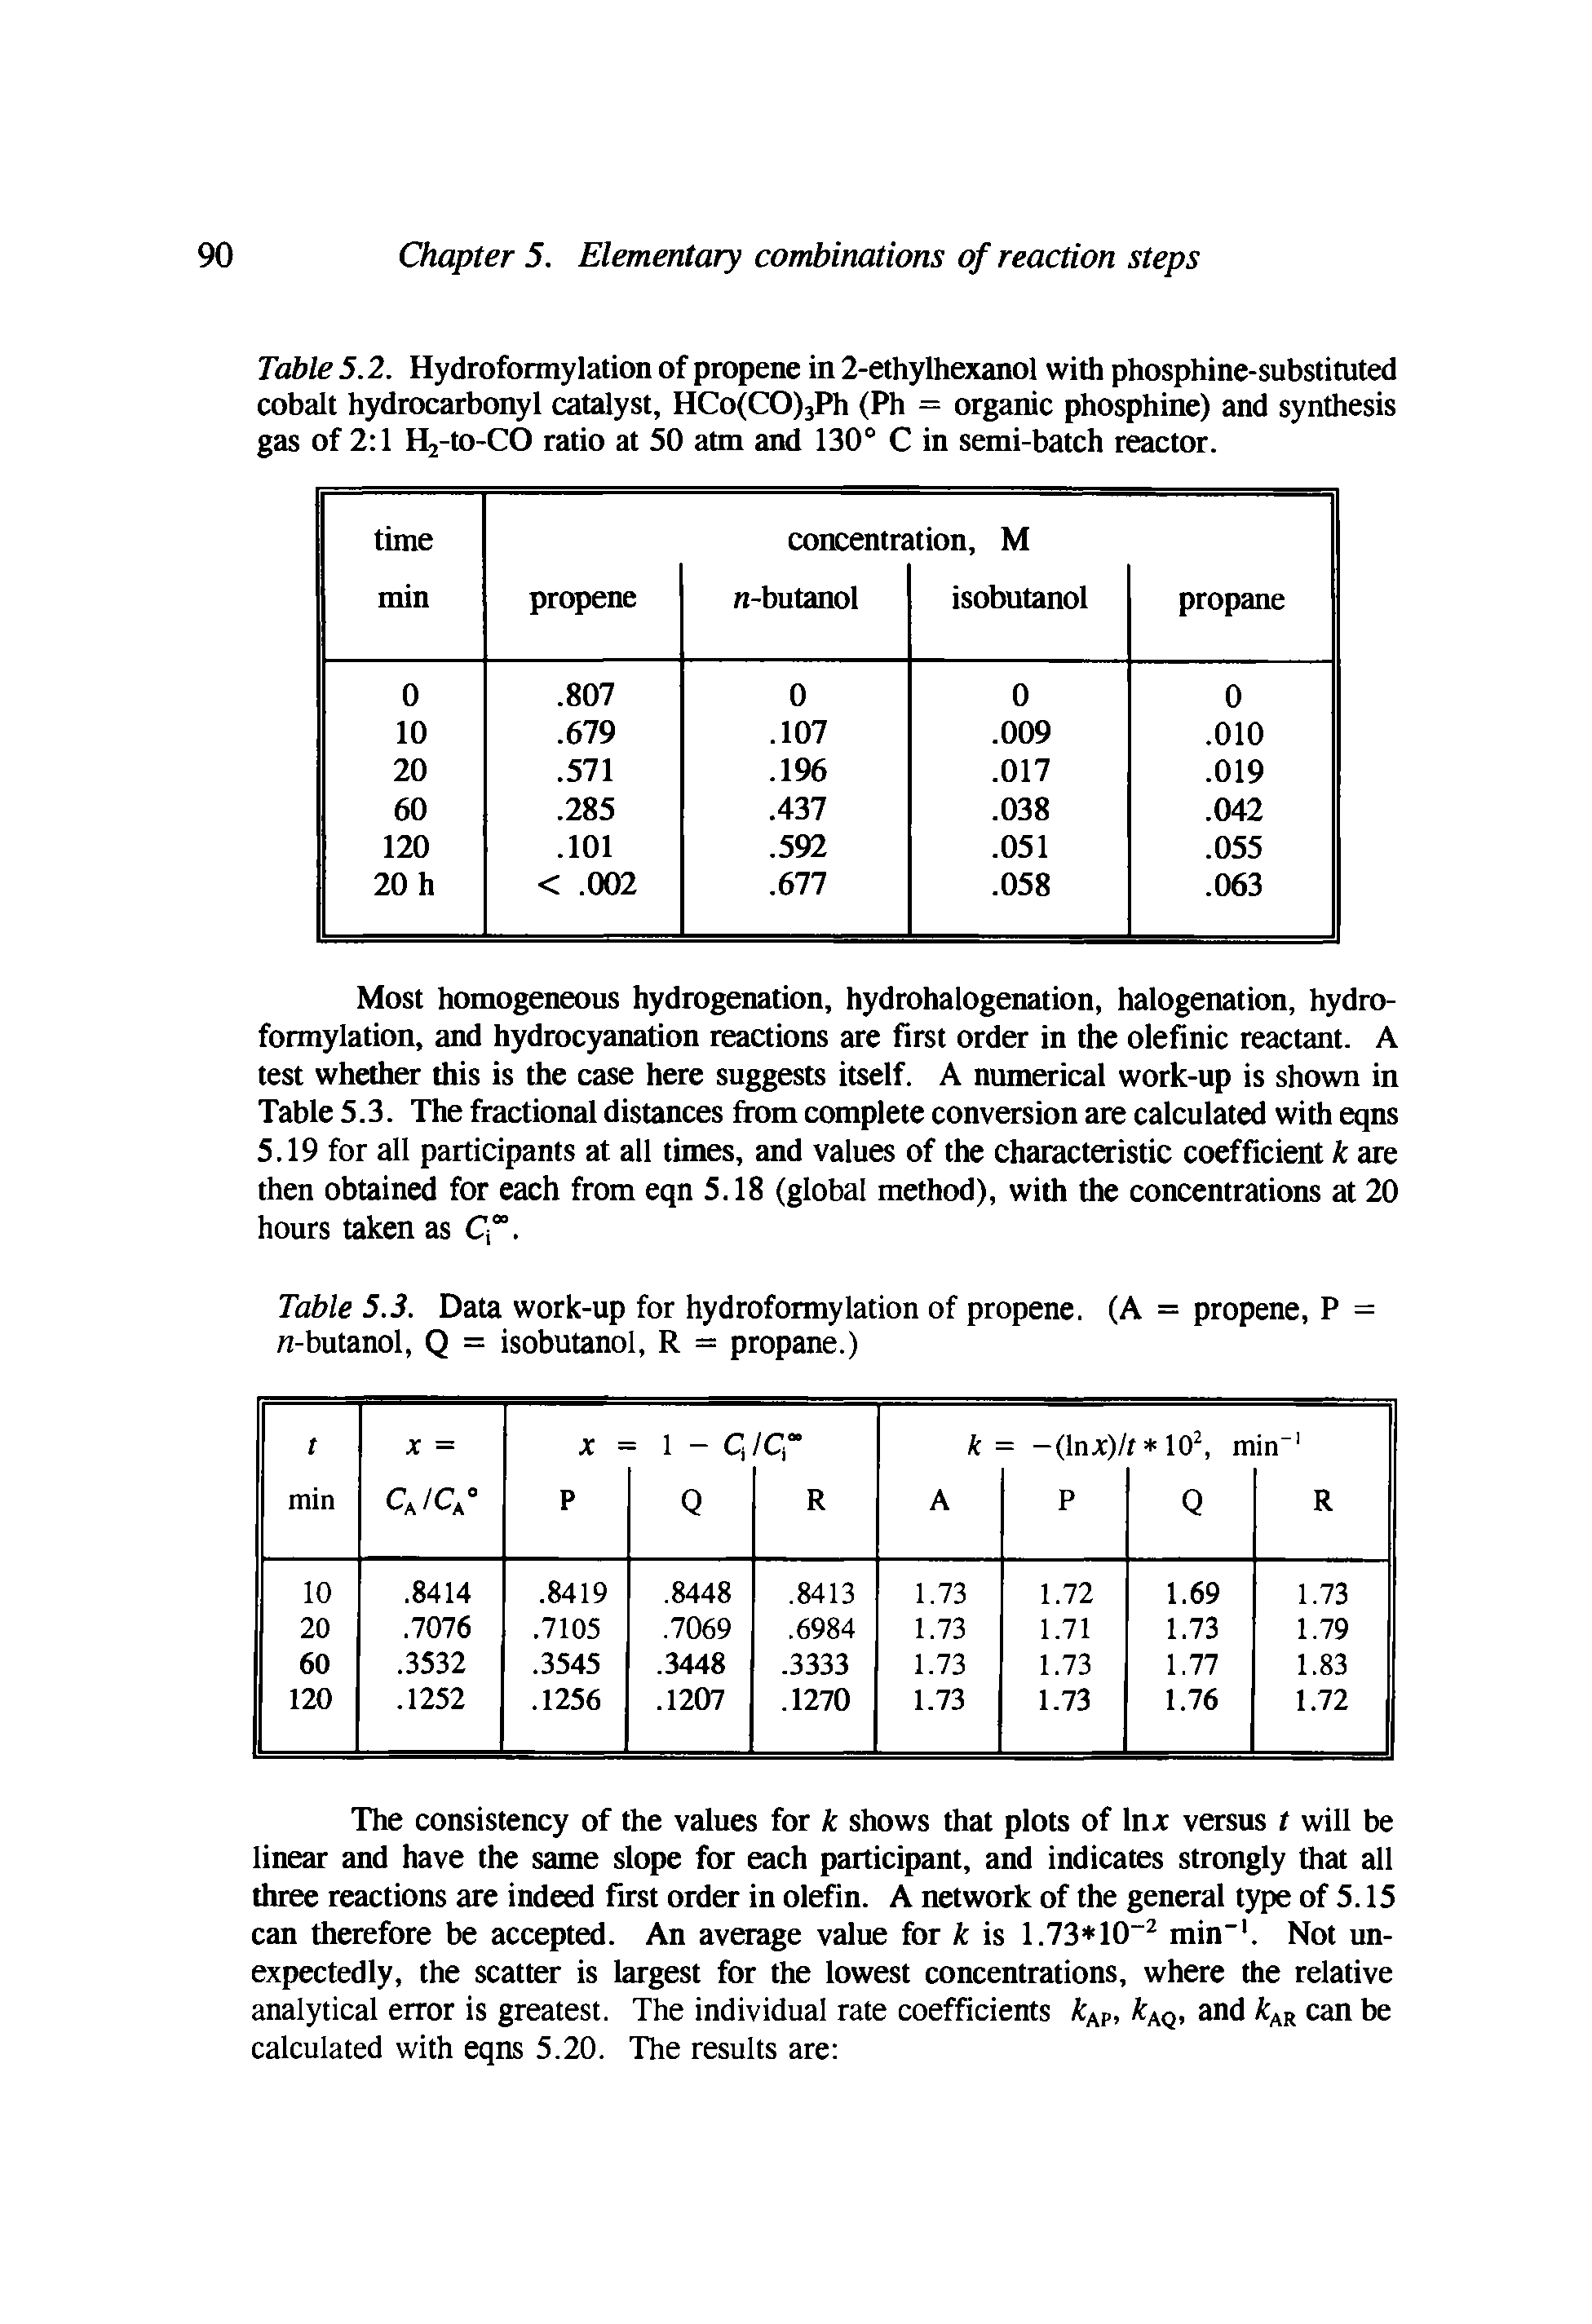 Table 5.2. Hydroformylation of propene in 2-ethylhexanol with phosphine-substituted cobalt hydrocarbonyl catalyst, HCo(CO)3Ph (Ph = organic phosphine) and synthesis gas of 2 1 H2-to-CO ratio at 50 atm and 130° C in semi-batch reactor.